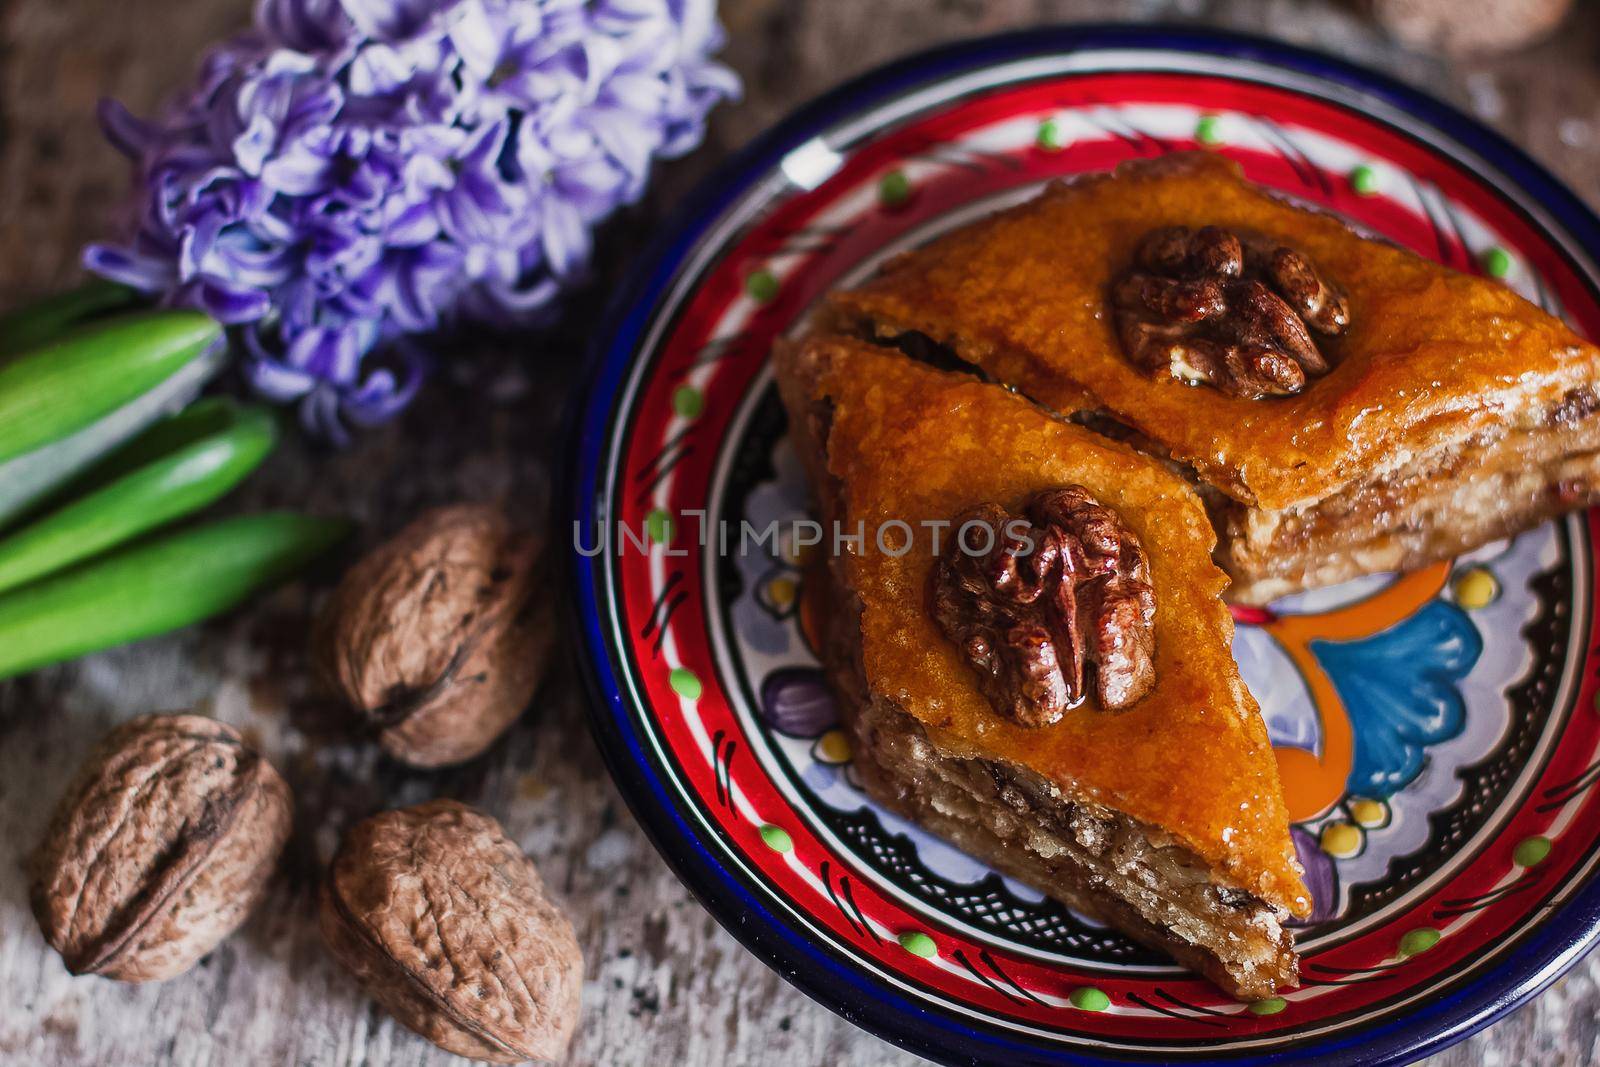 Assorted baklava. A Turkish ramadan arabic sweet dessert on a decorative plate, with coffee cup in the background. Middle eastern food baklava with nuts and honey syrup by mmp1206